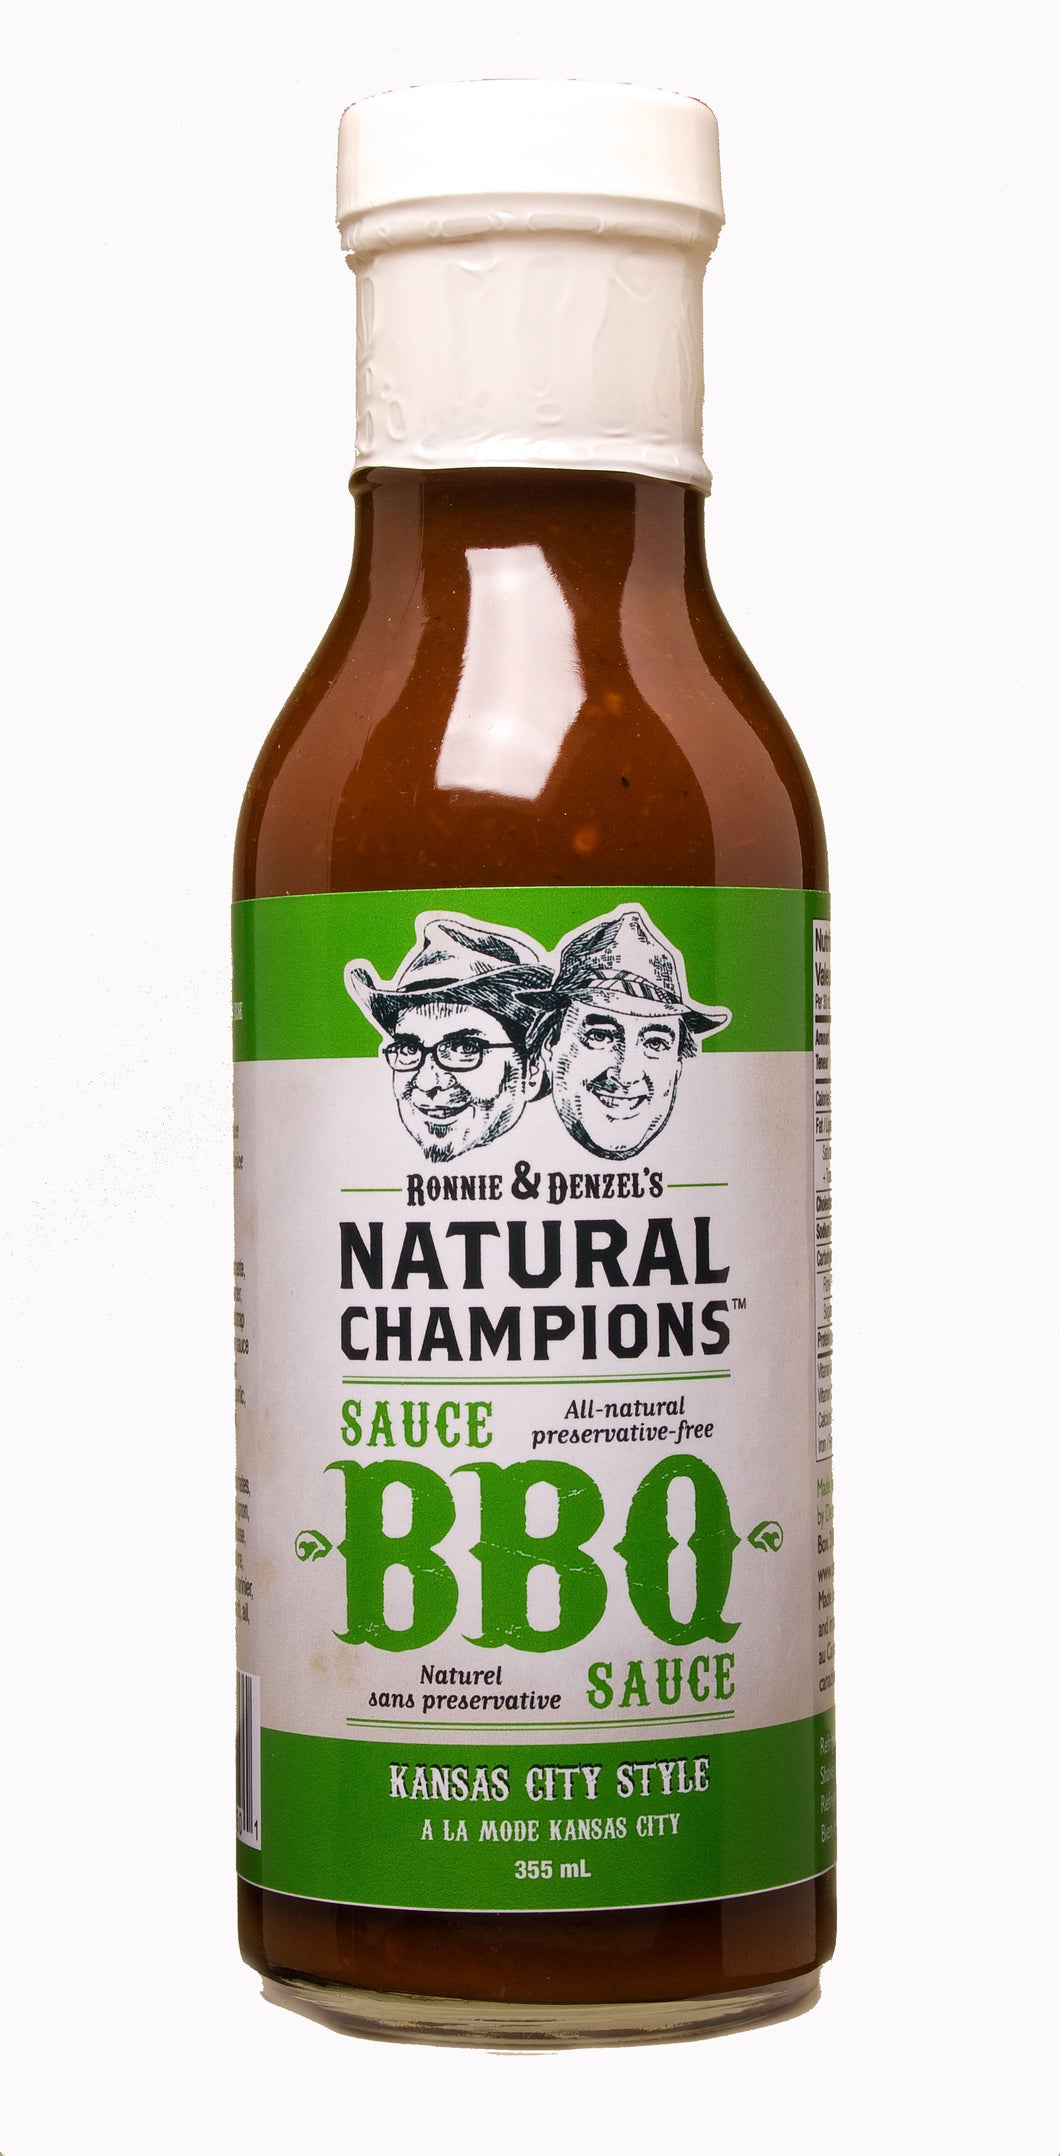 A 355ml bottle of Ronnie and Denzel's Natural Champions Kansas City Style BBQ Sauce.